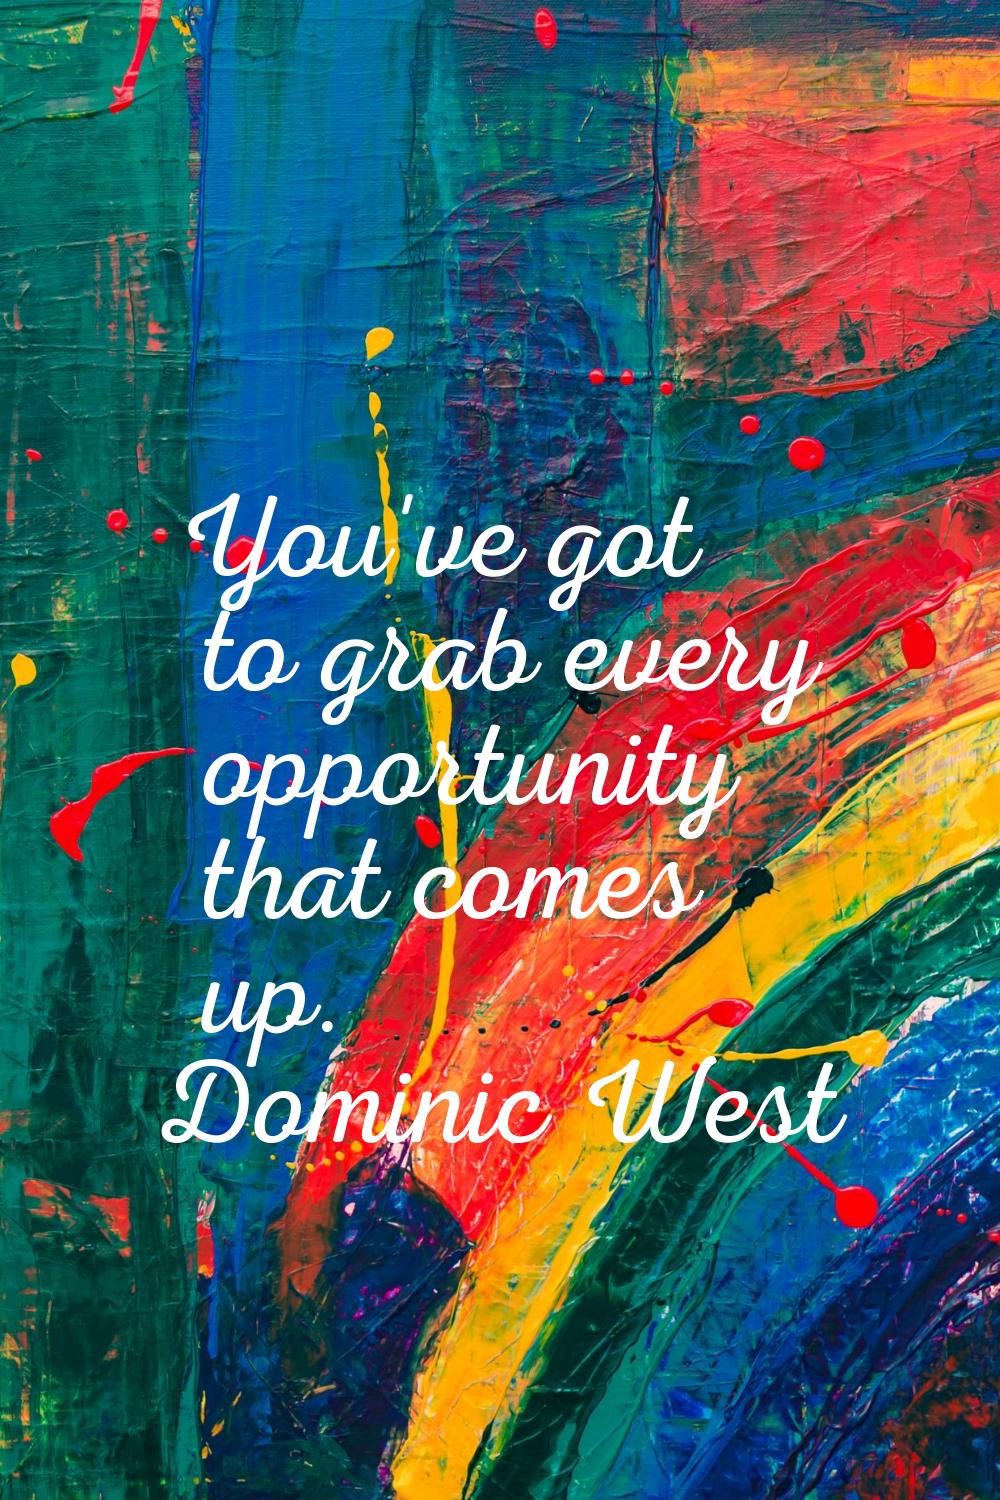 You've got to grab every opportunity that comes up.